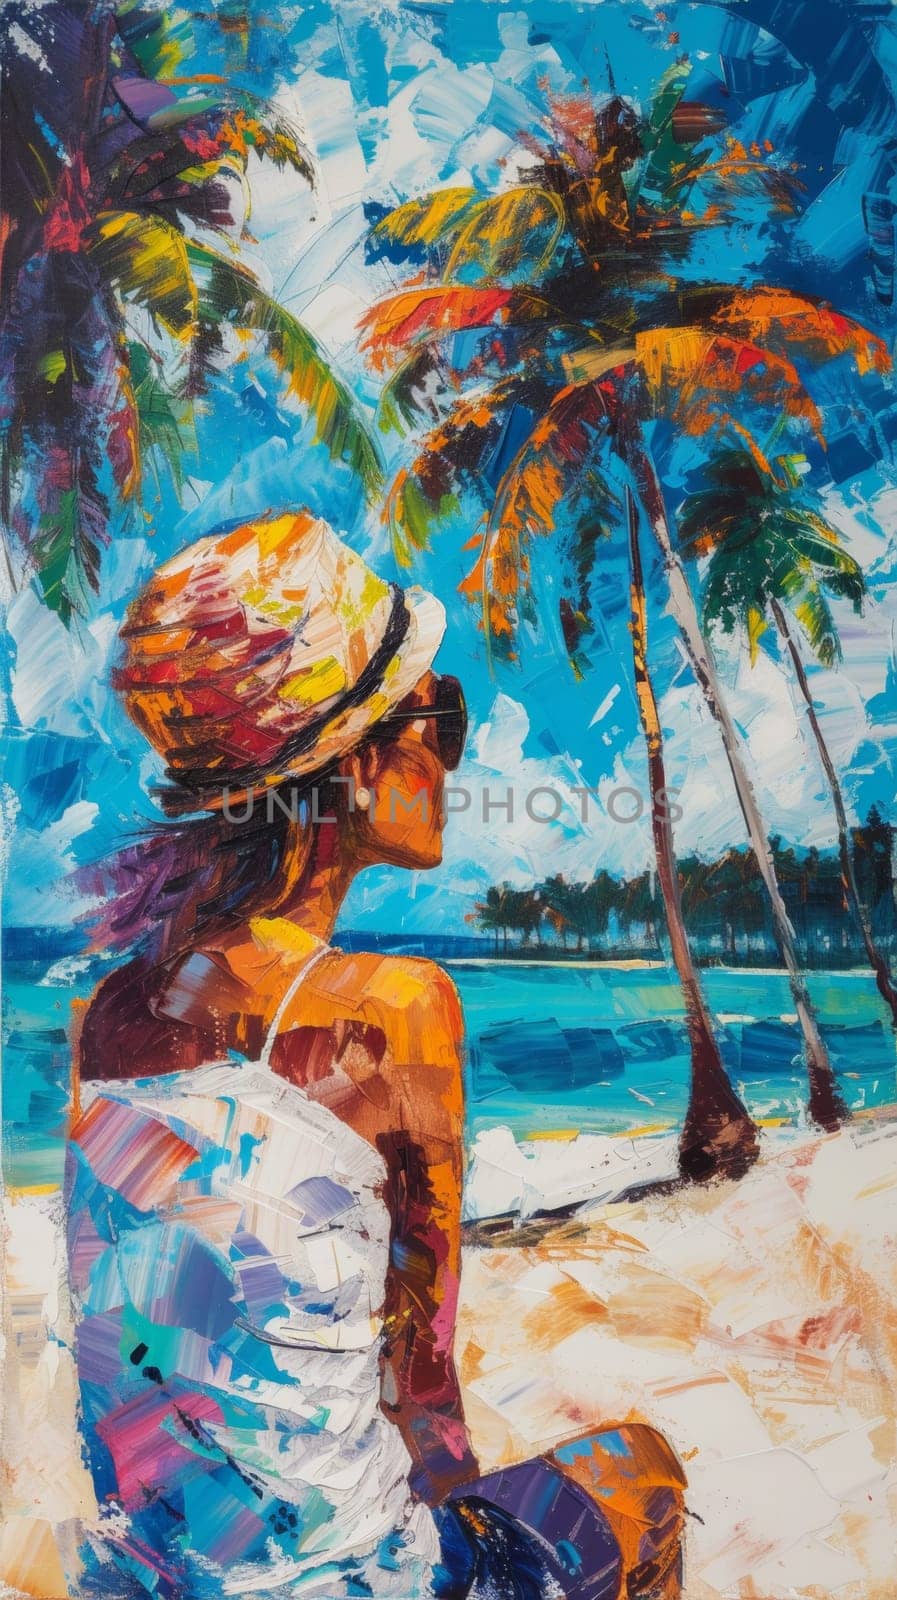 A painting of a woman sitting on the beach with palm trees in background